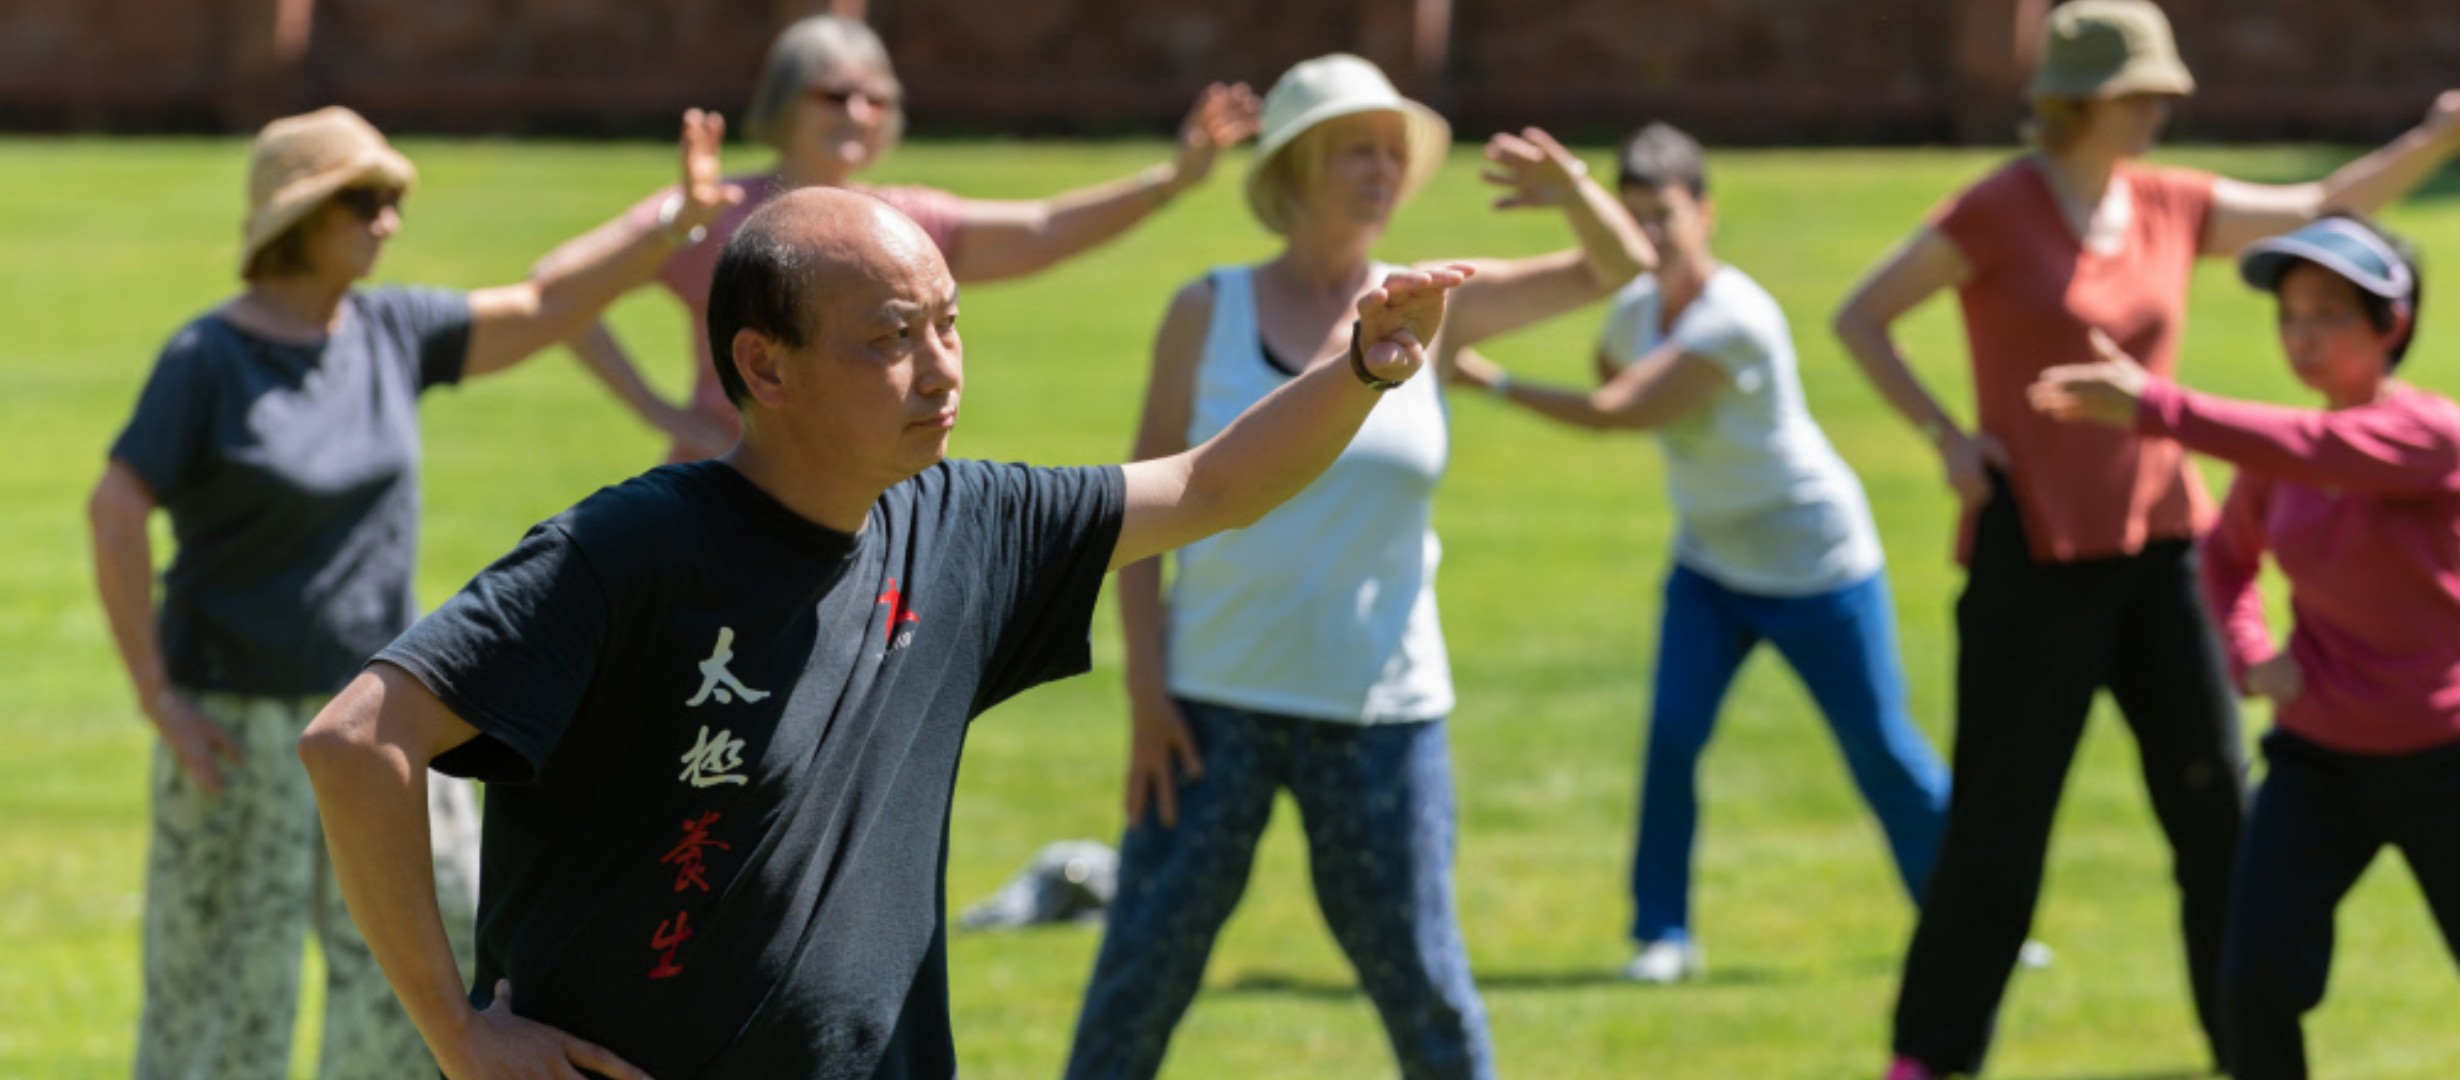 A group of people practice Tai Chi on a lawn at a National Trust property